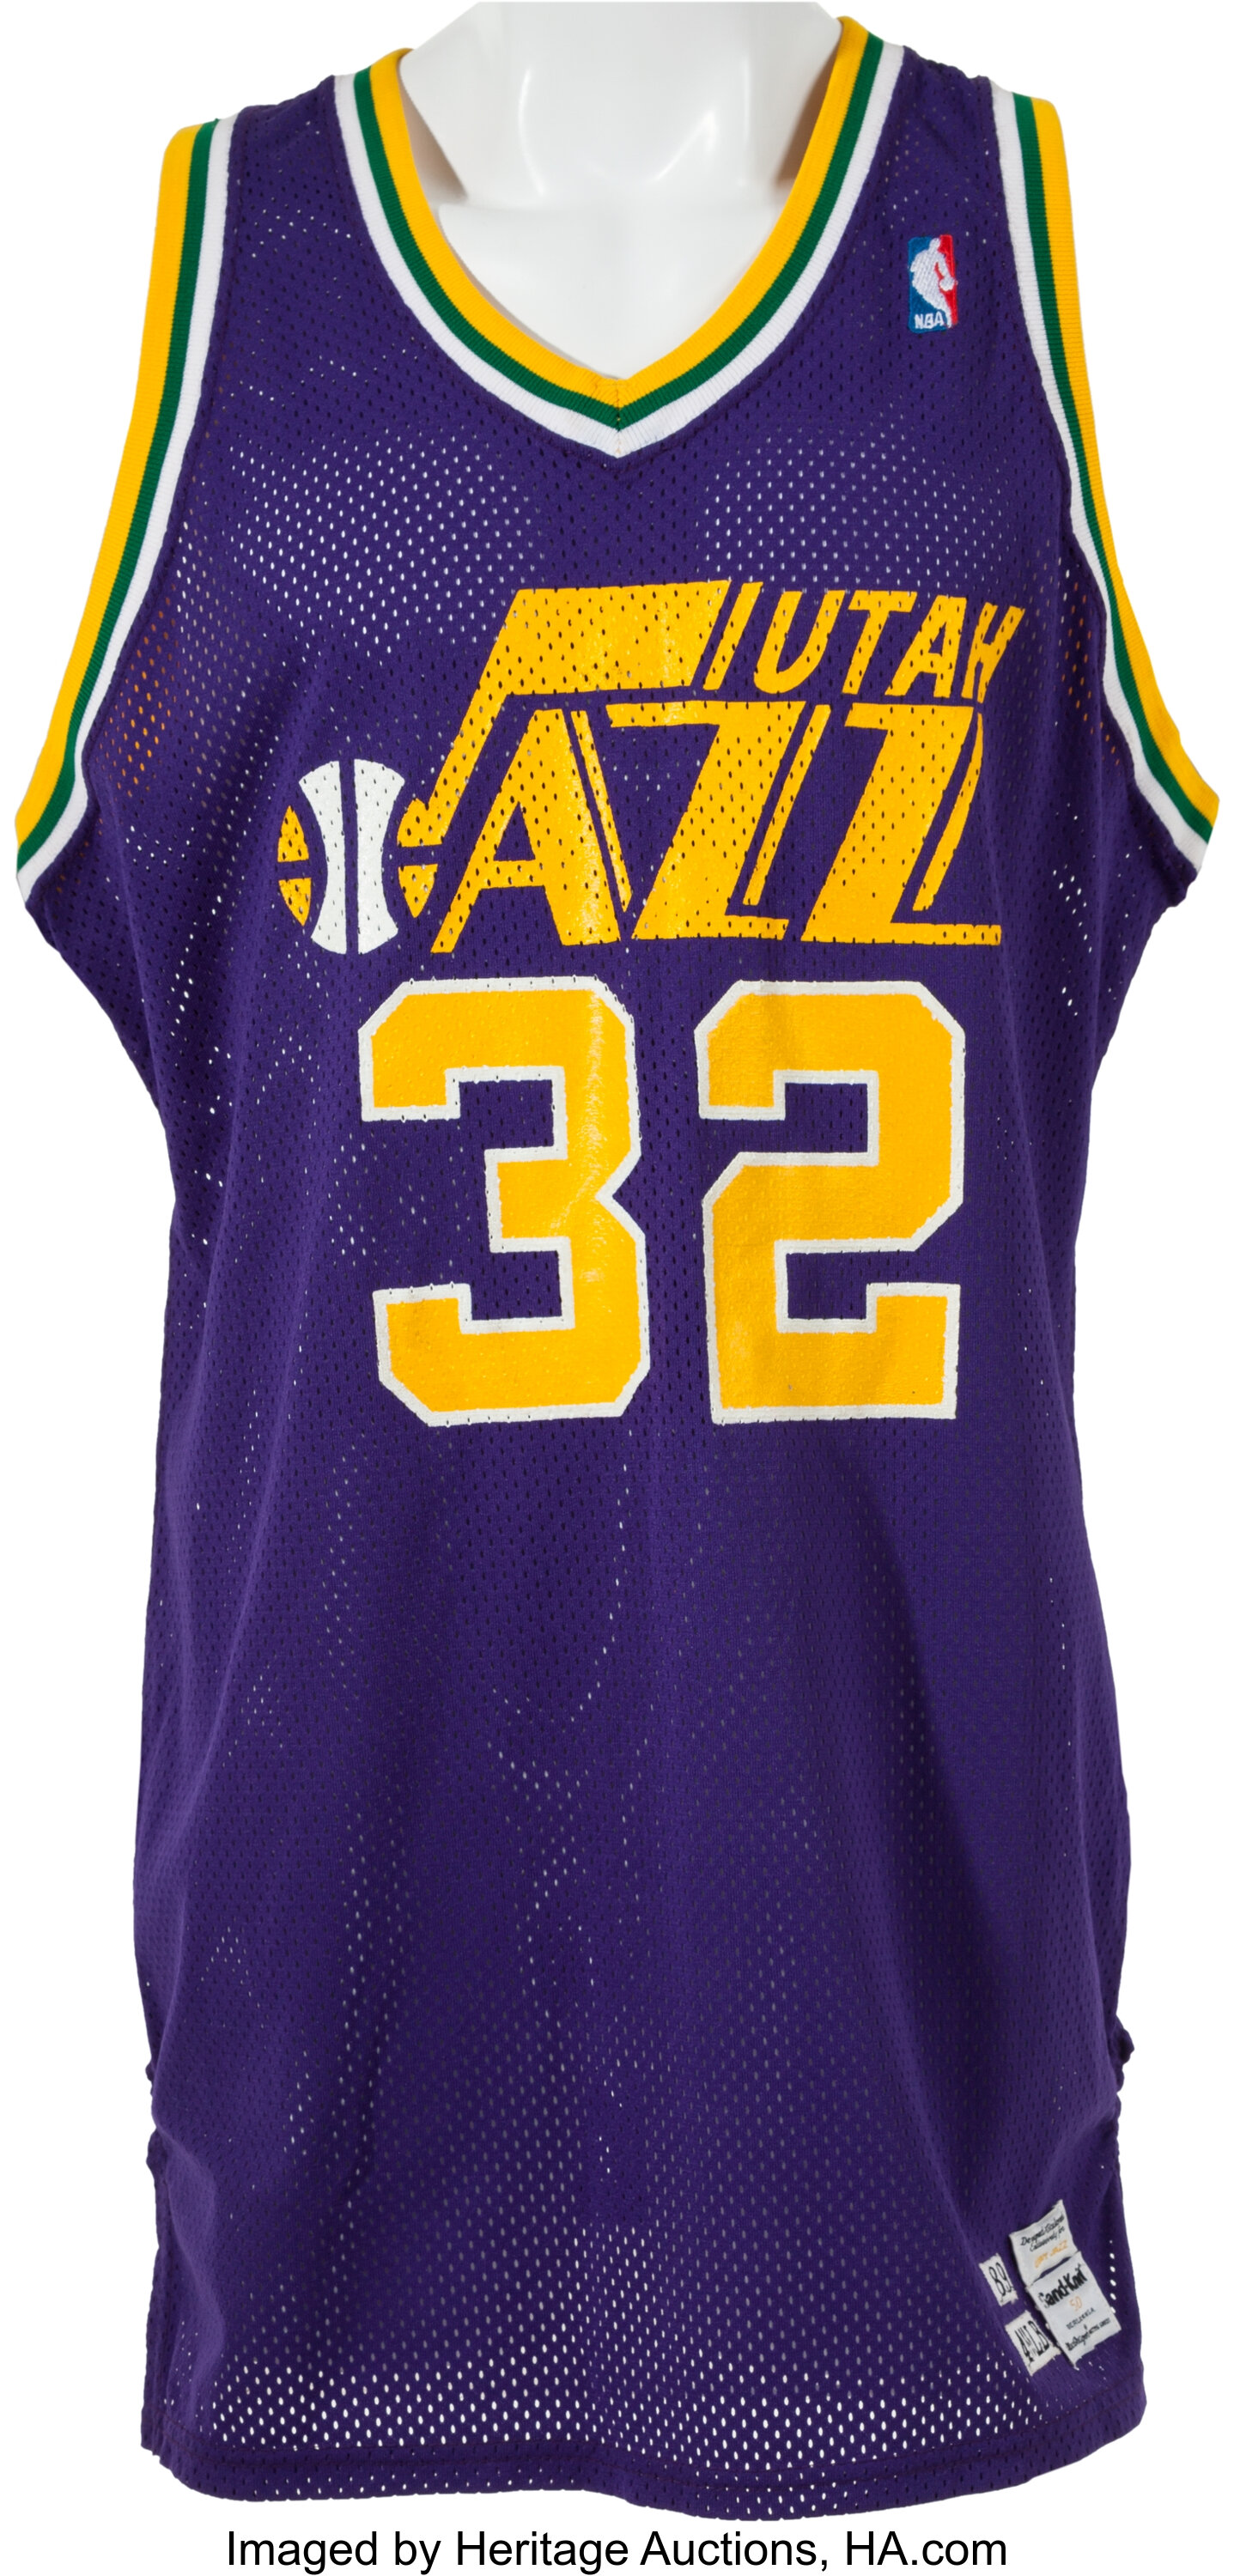 Sold out Jazz jerseys are as popular as they are difficult to find